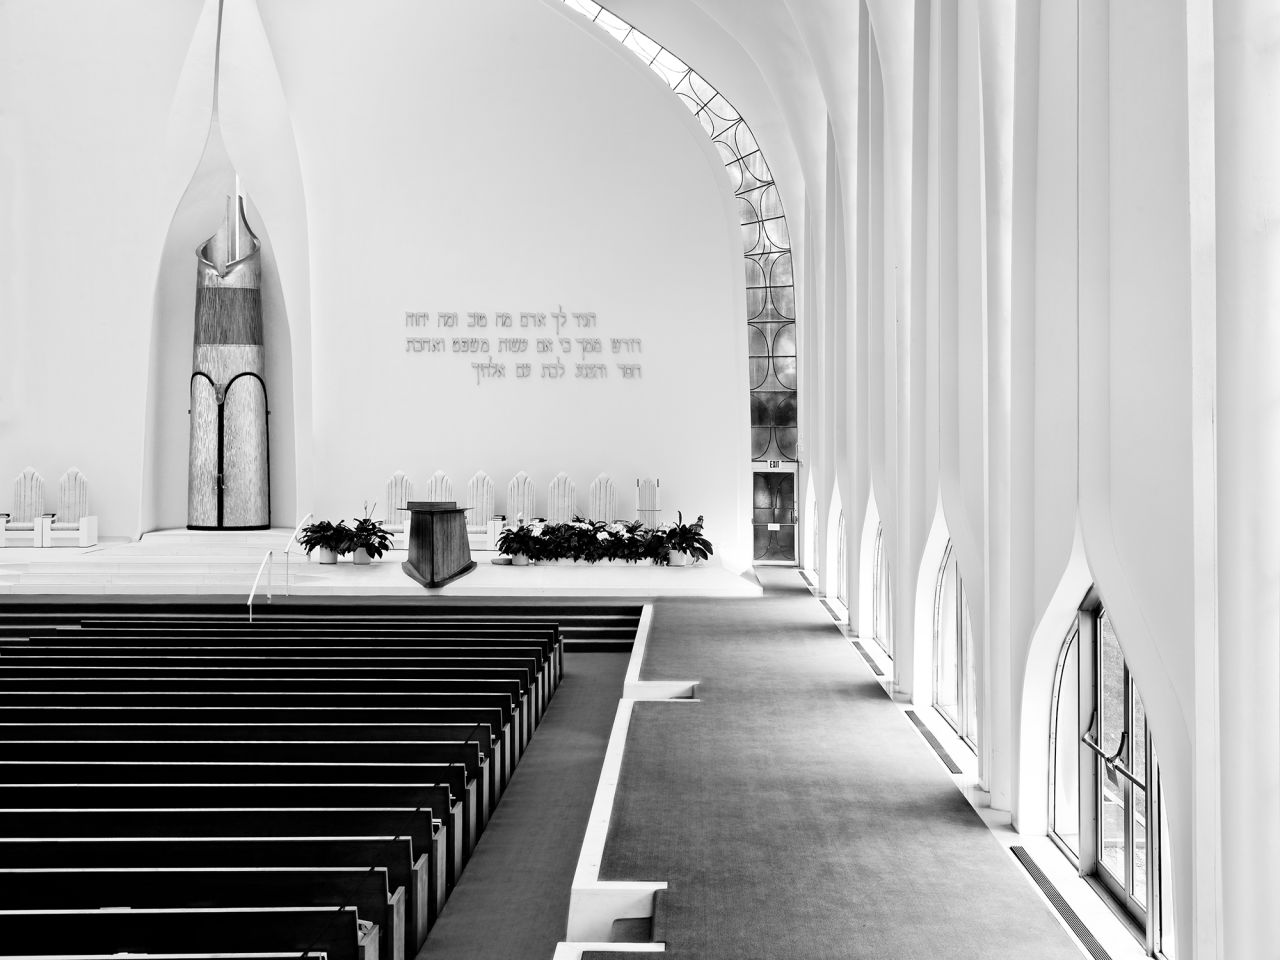 The North Shore Congregation of Israel Synagogue in Glencoe, Illinois, is the work of Minoru Yamasaki, the architect who designed the twin towers of the World Trade Center in New York City.